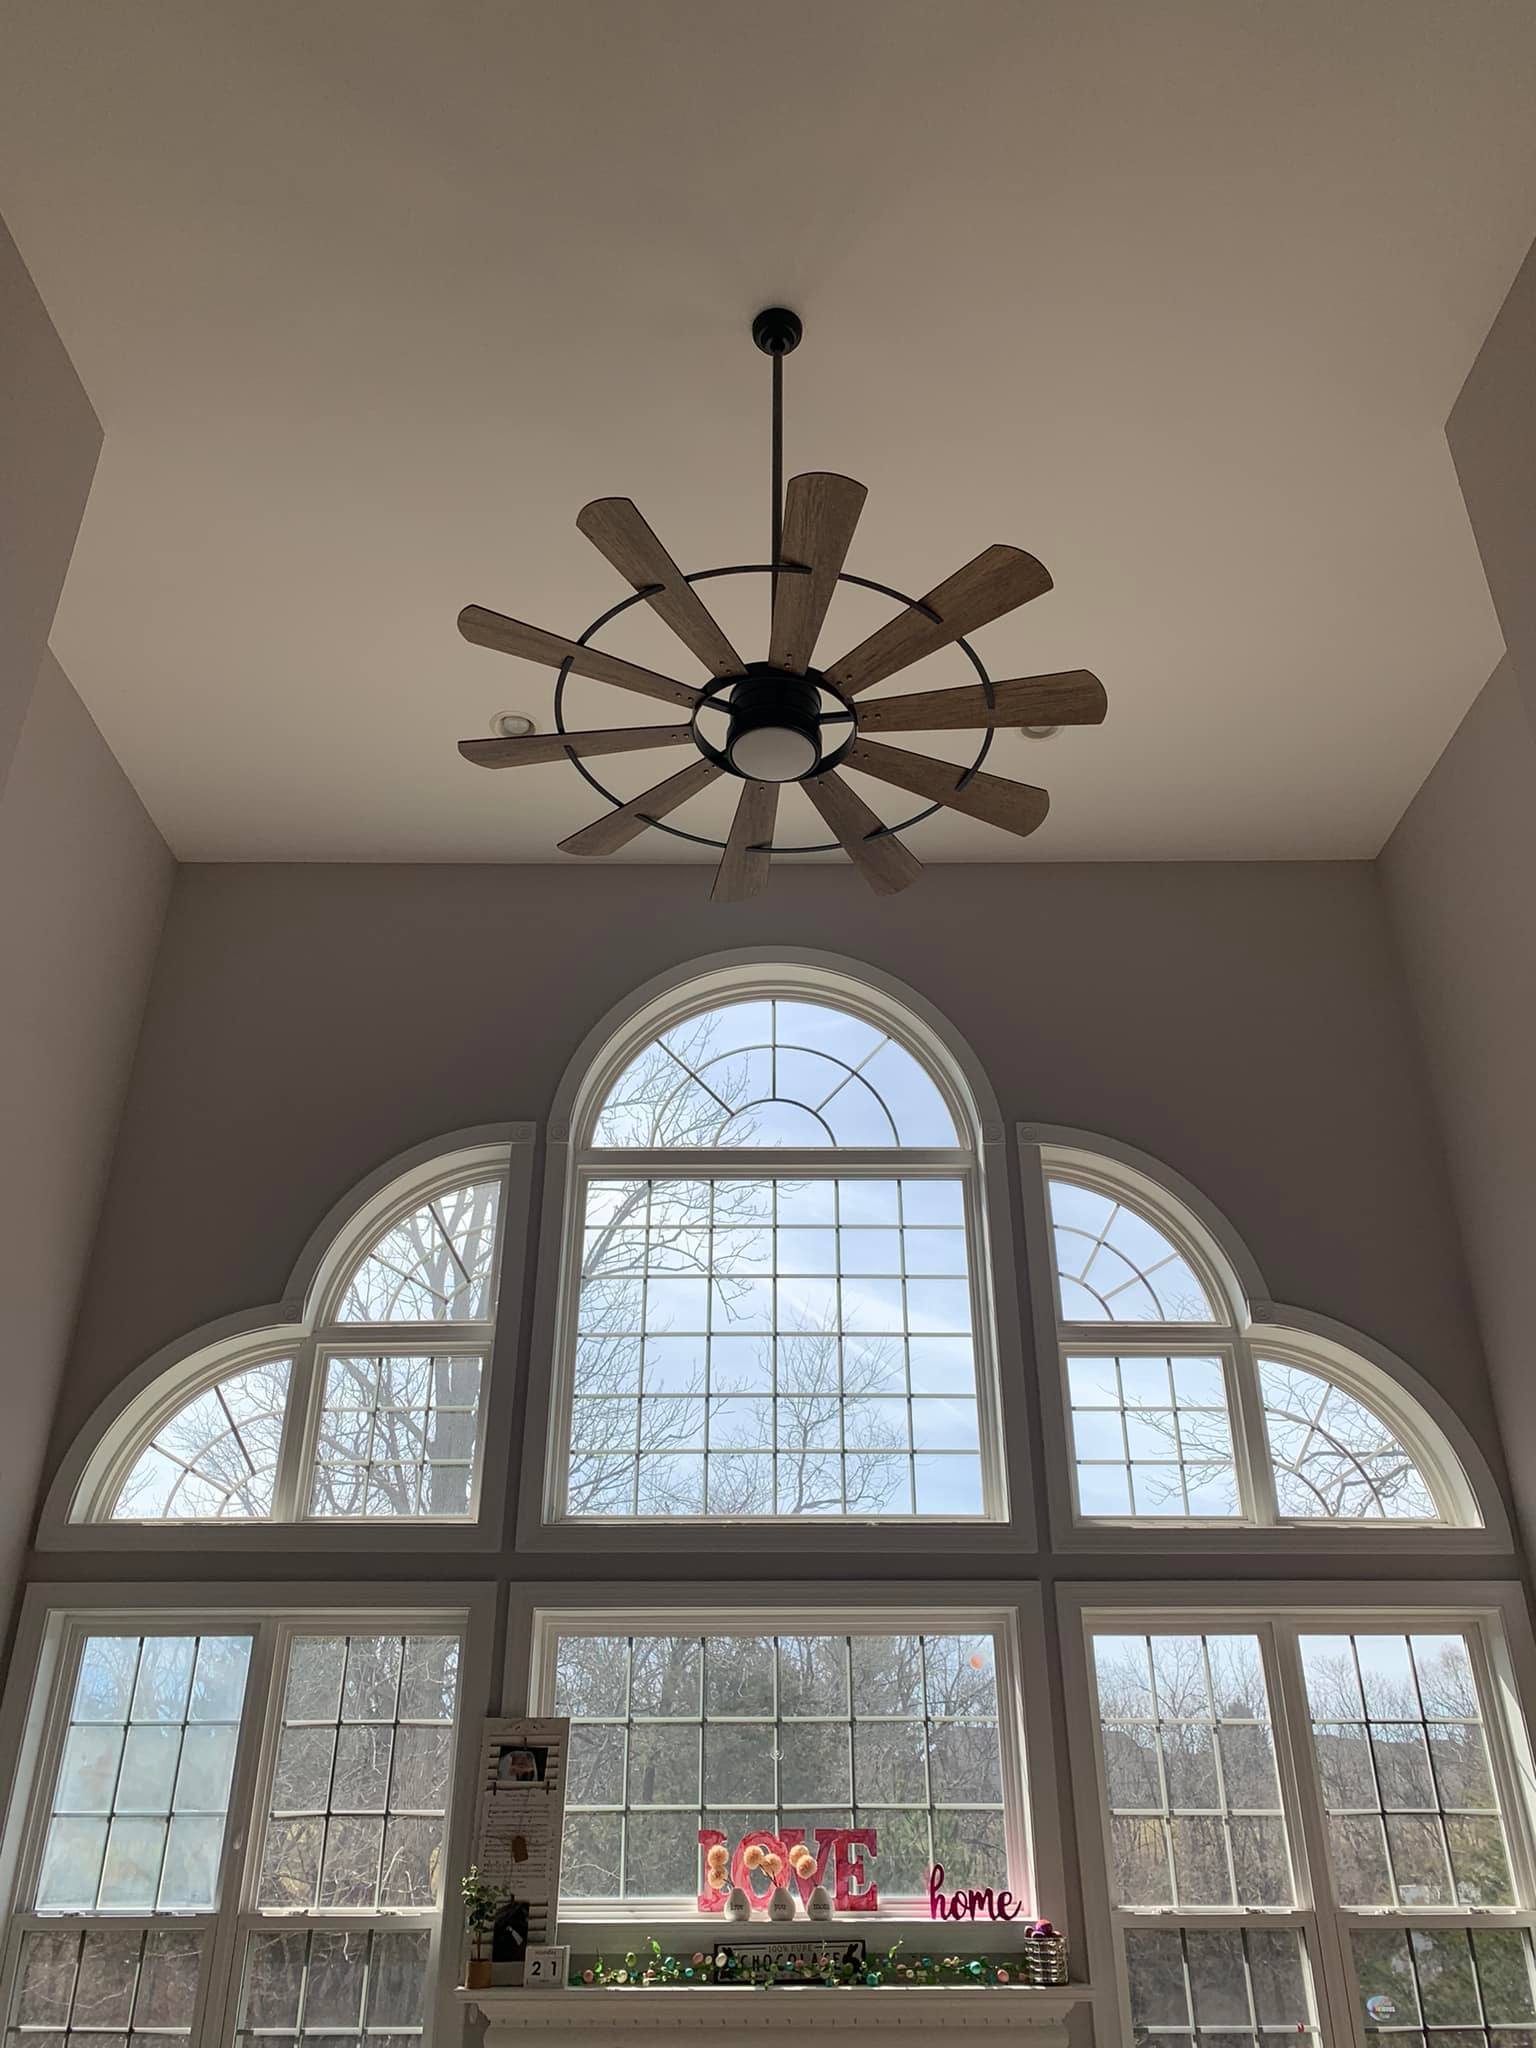 Electrician Ceiling Fan Installation - Electricians Collegeville